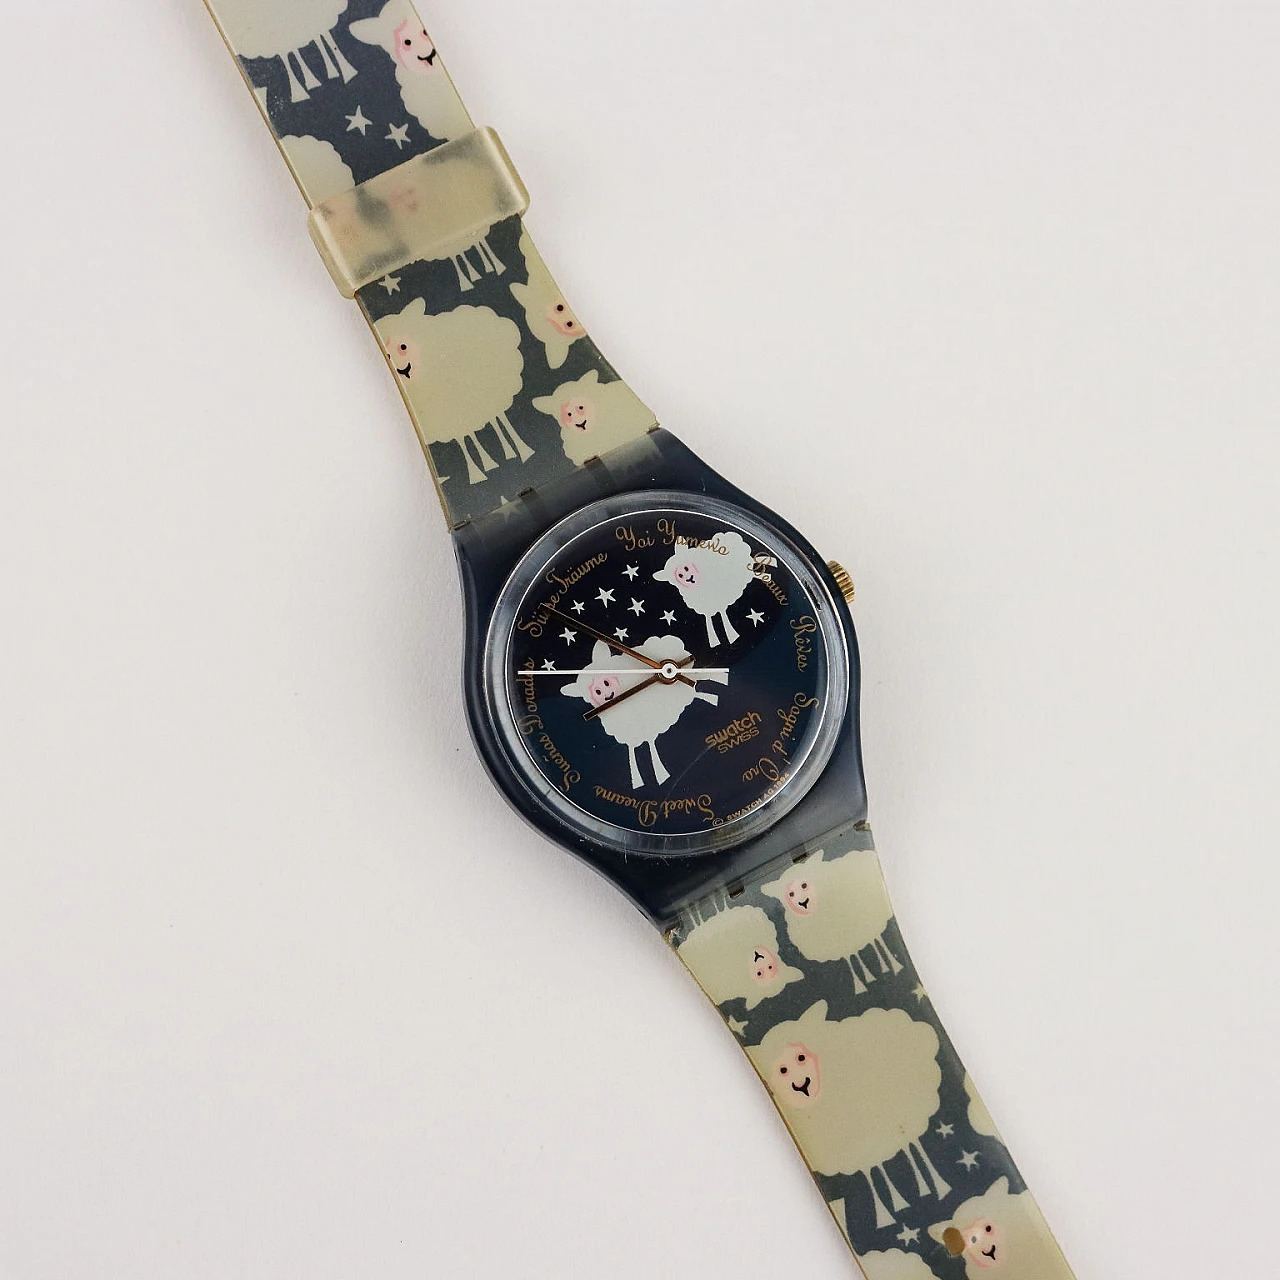 Swatch Montre Black Sheep GN150 water resistant, 1994 2